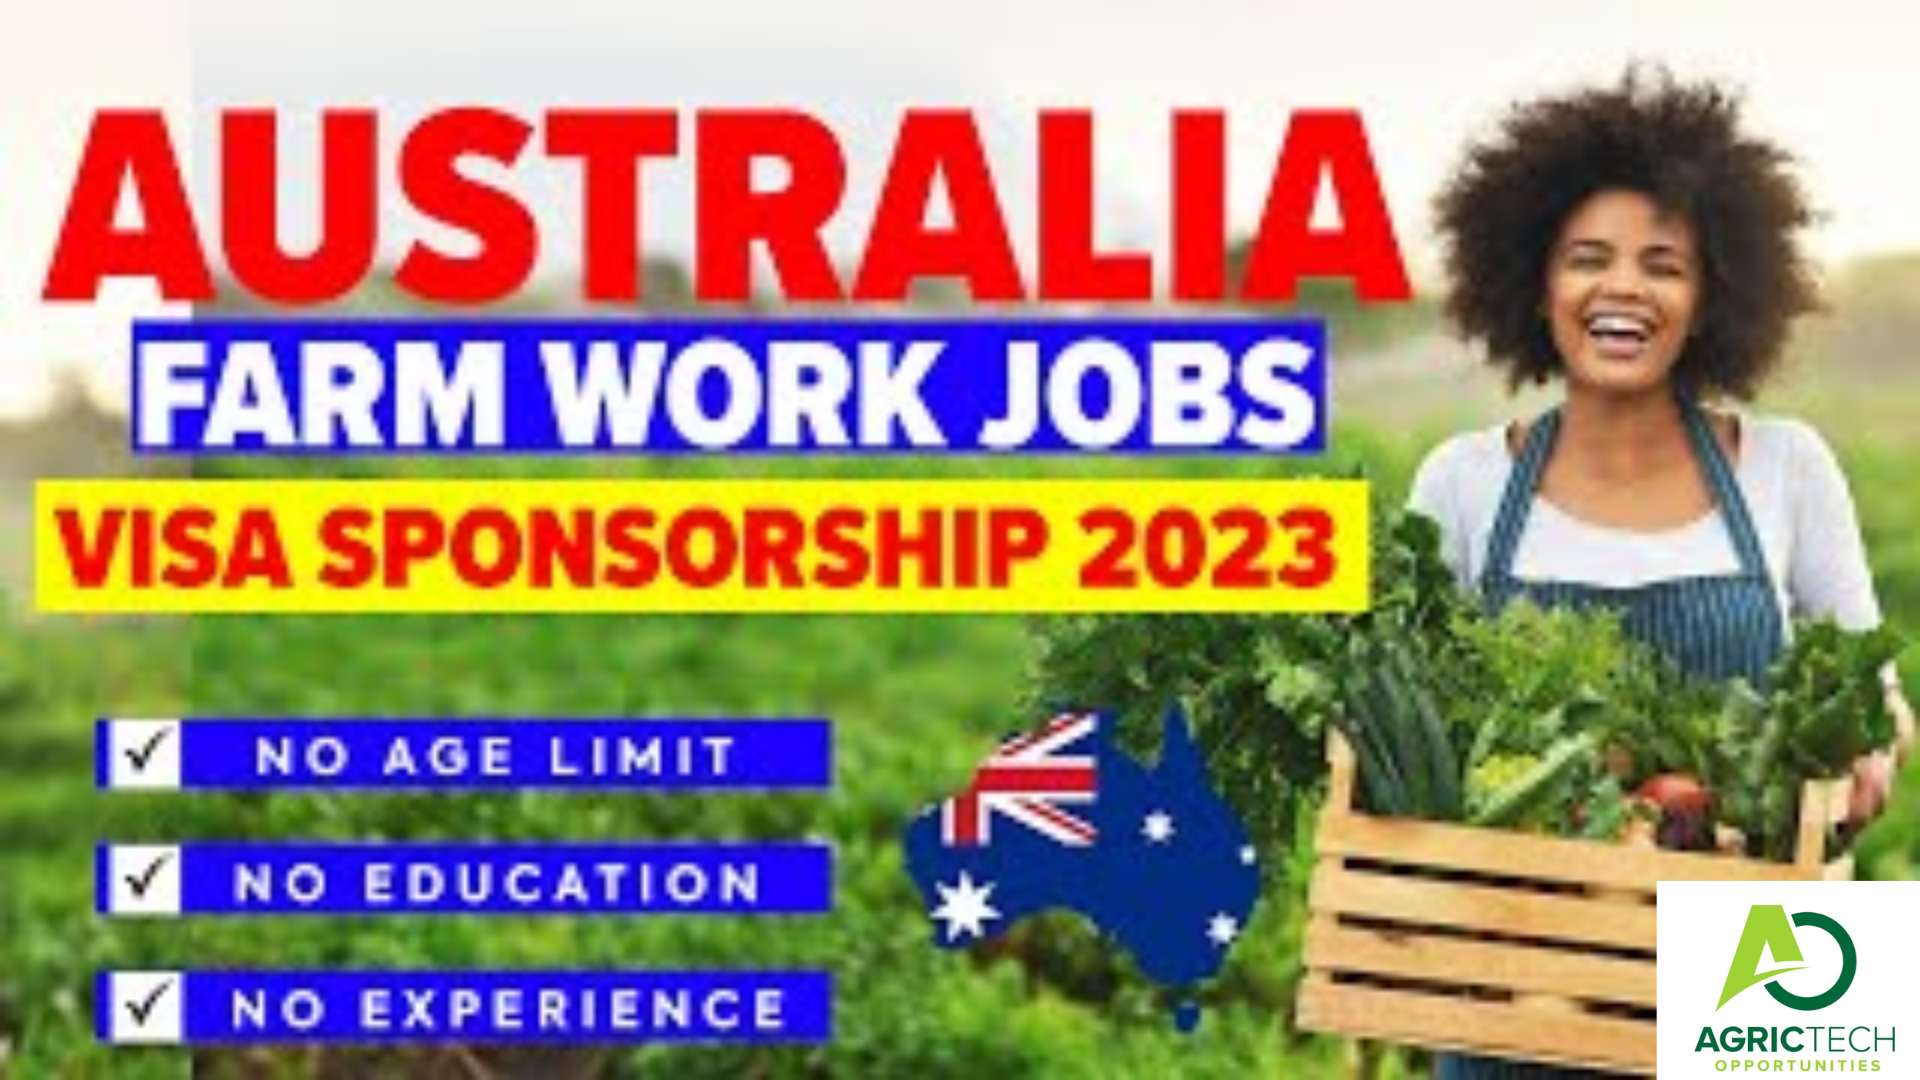 x5-farming-companies-in-australia-that-will-sponsor-visas-in-2023-every-nationality-is-eligible